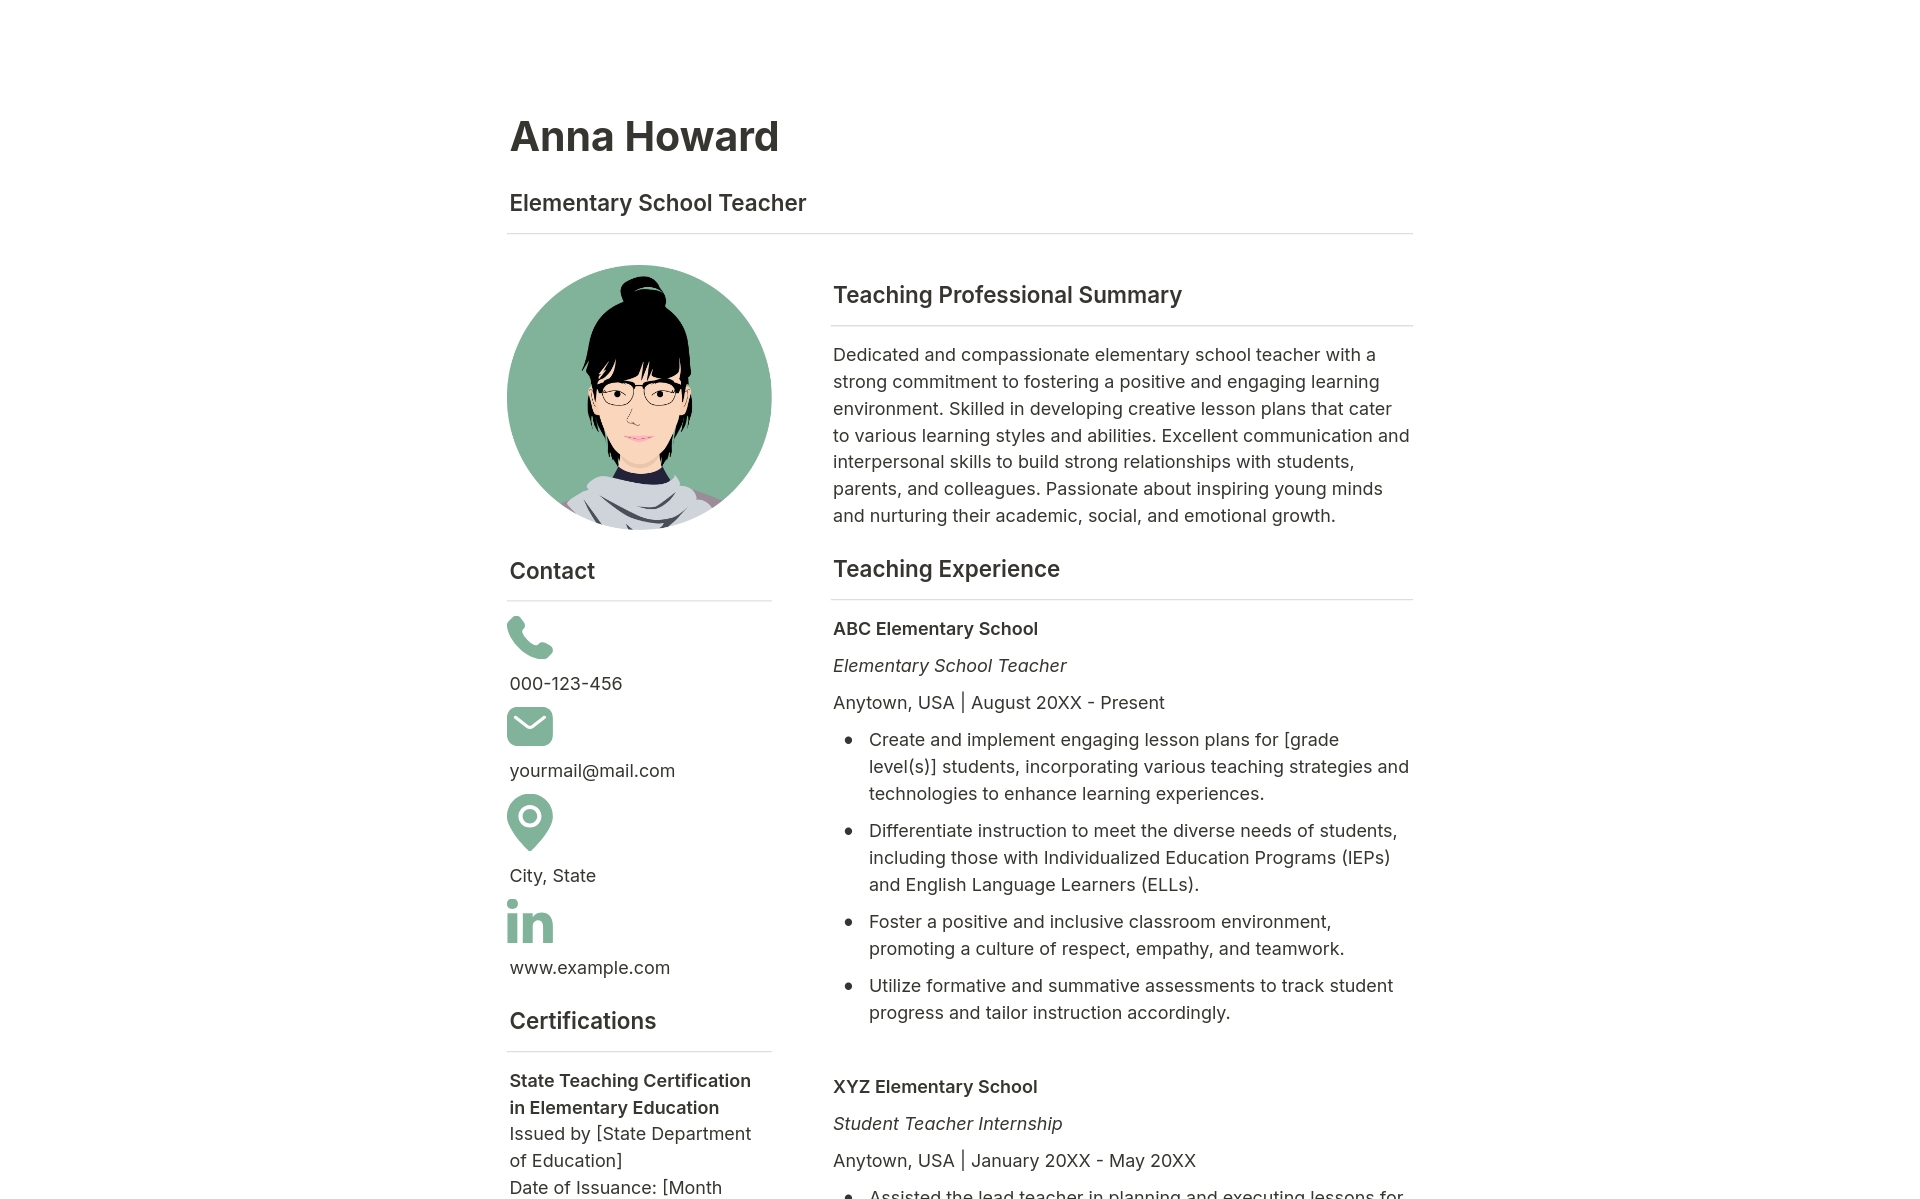  Green Theme Notion Resume template designed for eco-minded educators.